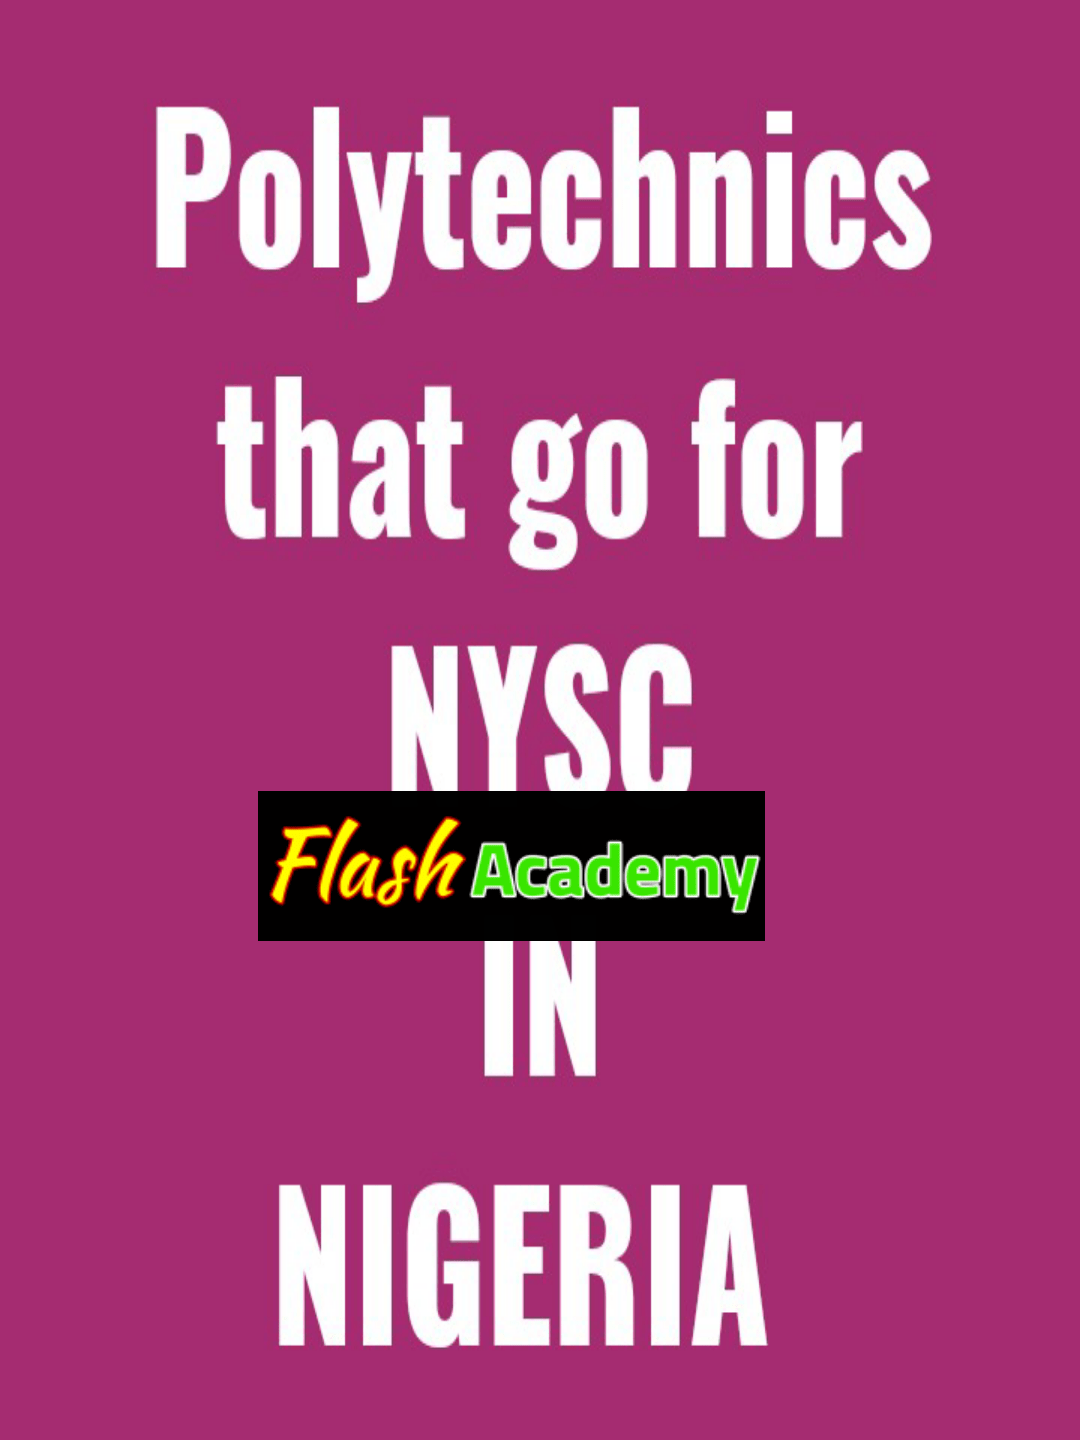 polytechnics that go for NYSC in Nigeria